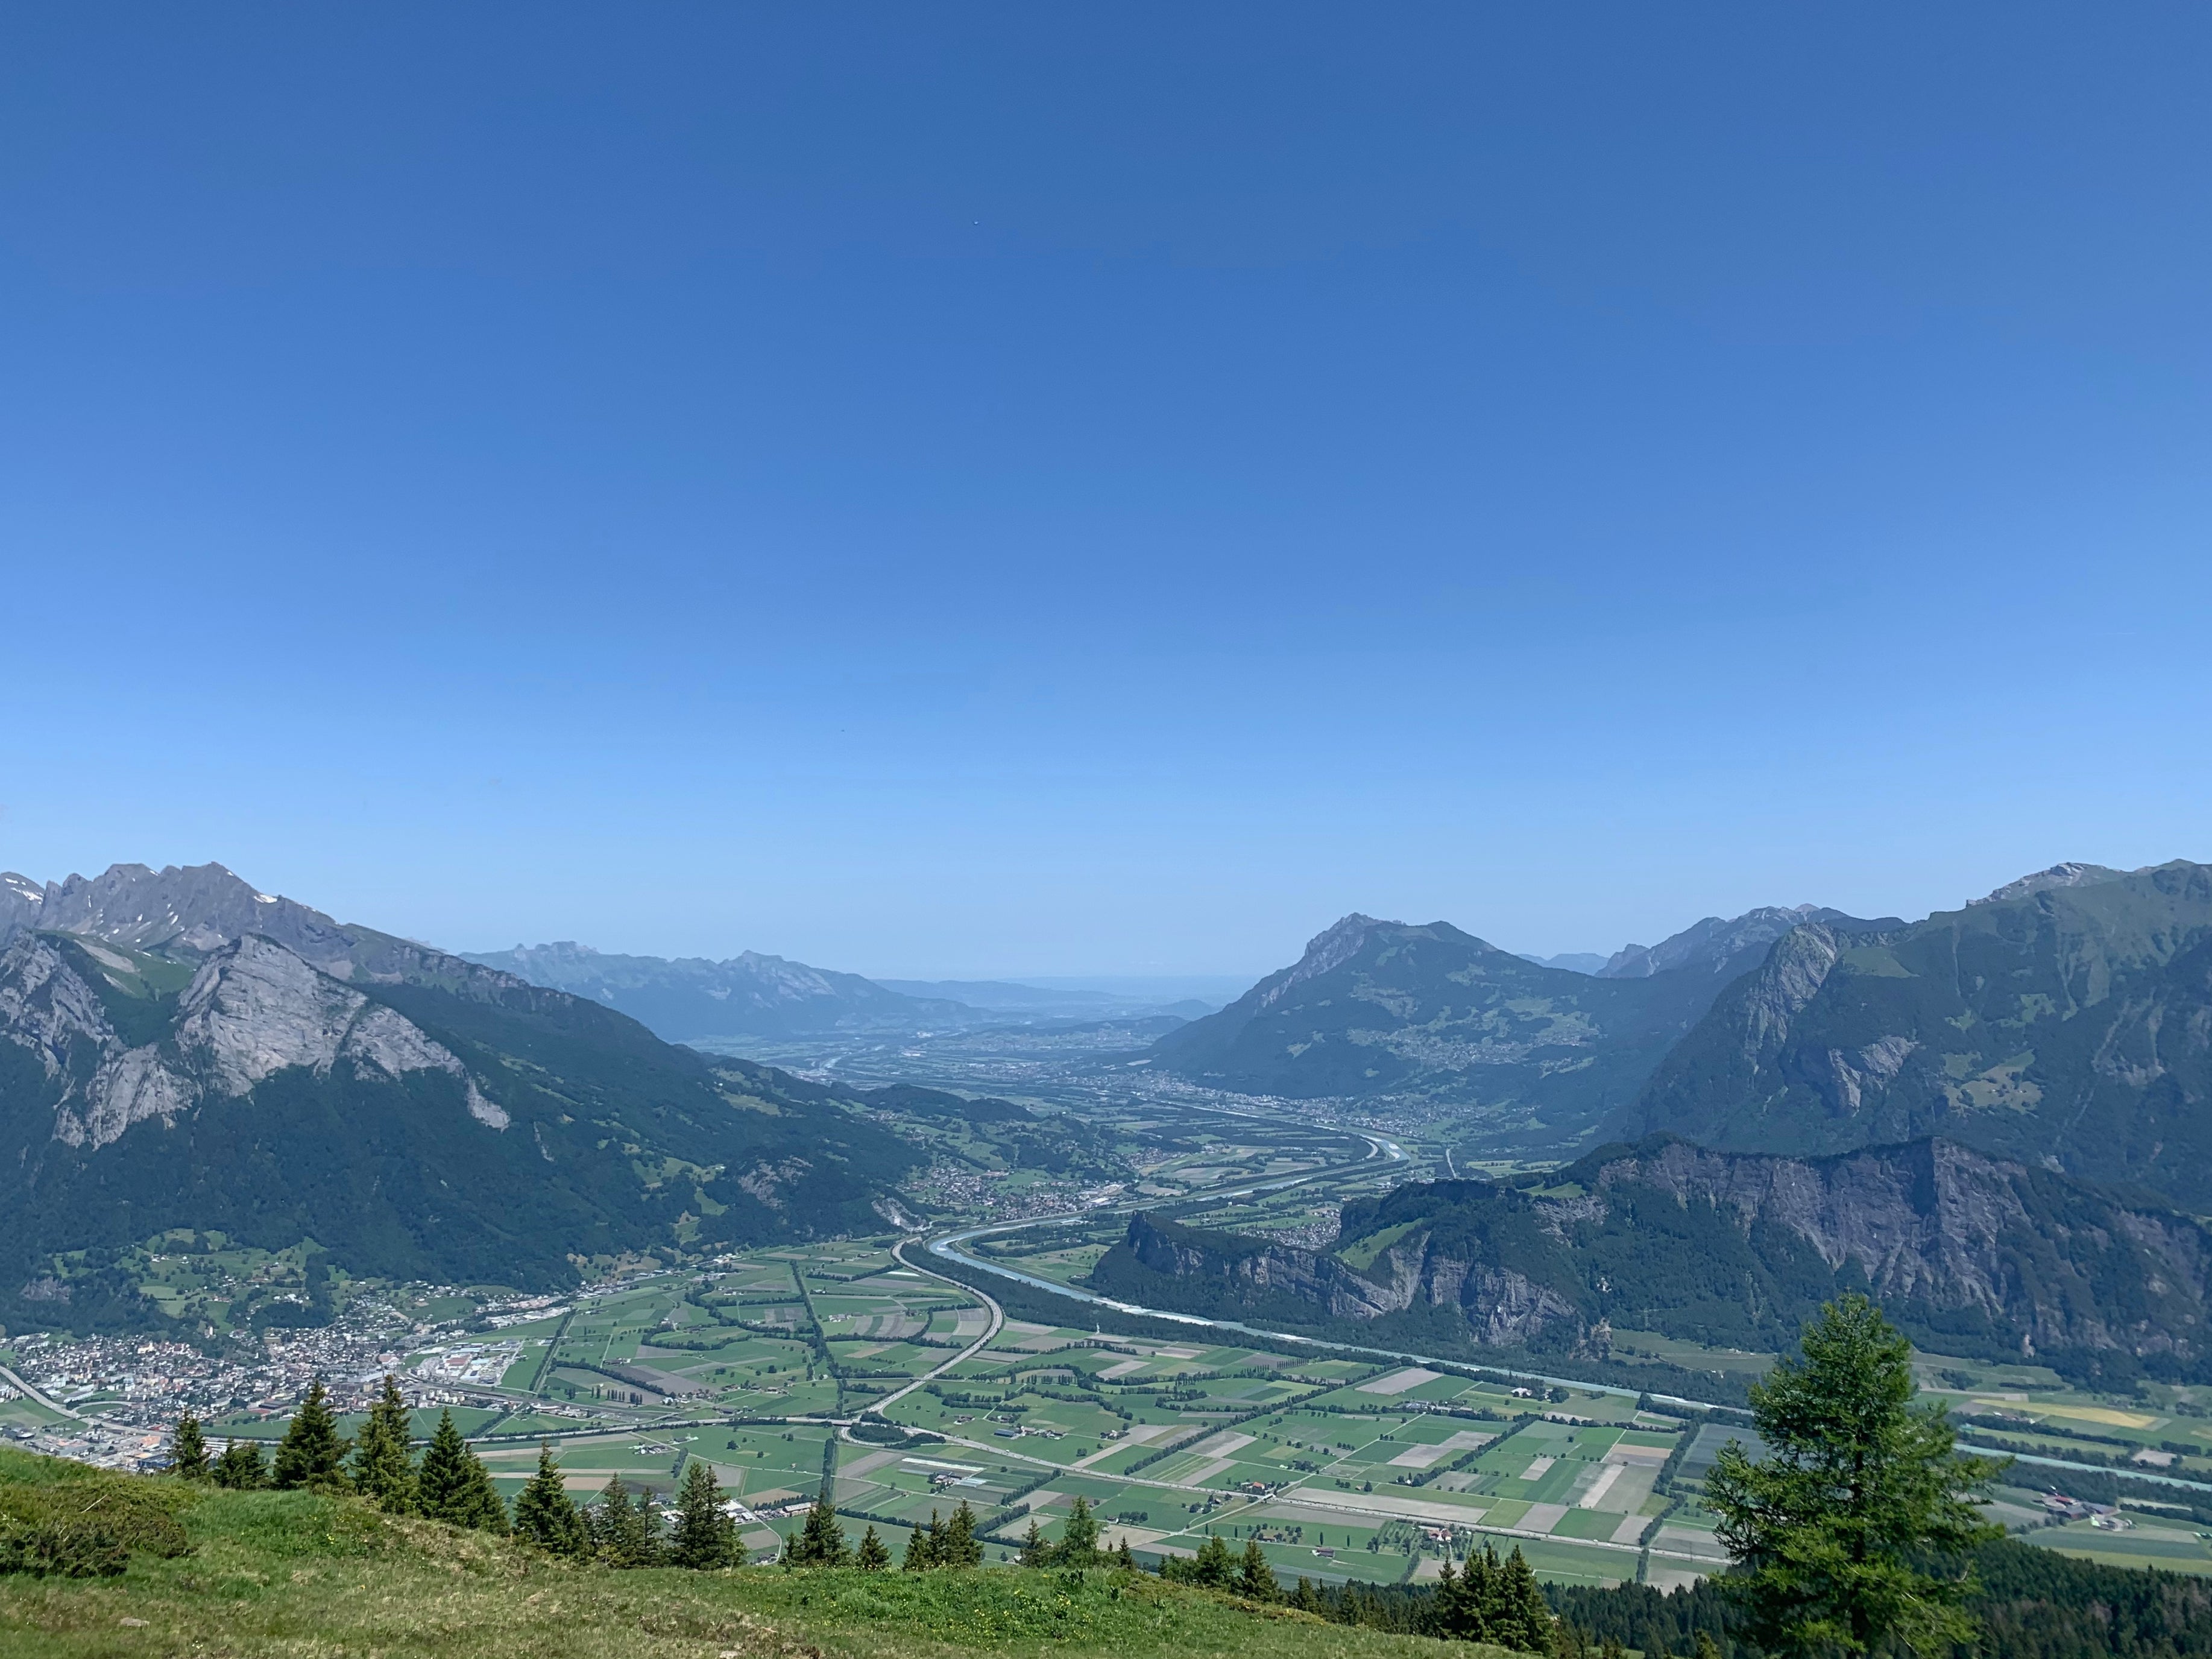 Panoramic views of the Mount Pizol valley